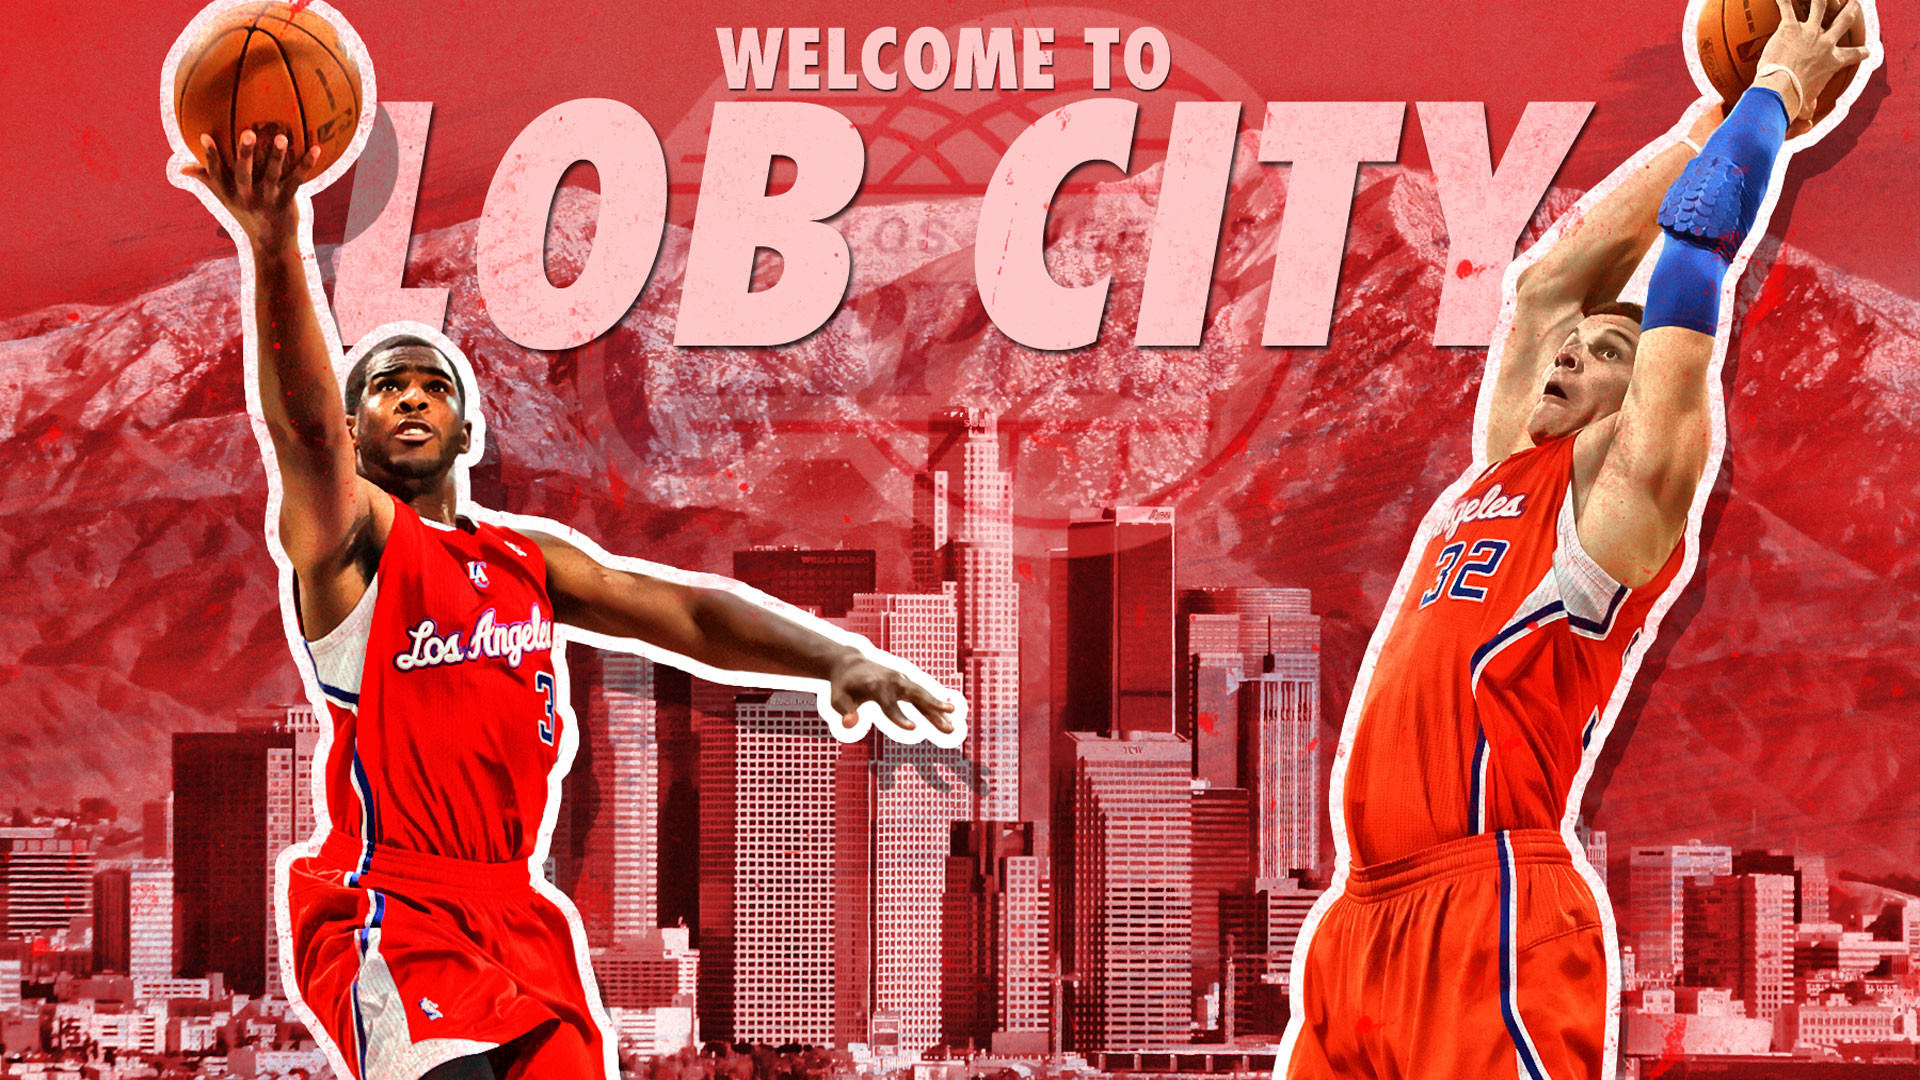 1920x1080 Los Angeles Clippers Wallpapers. Clippers 2012 Welcome To Lob City Wallpaper